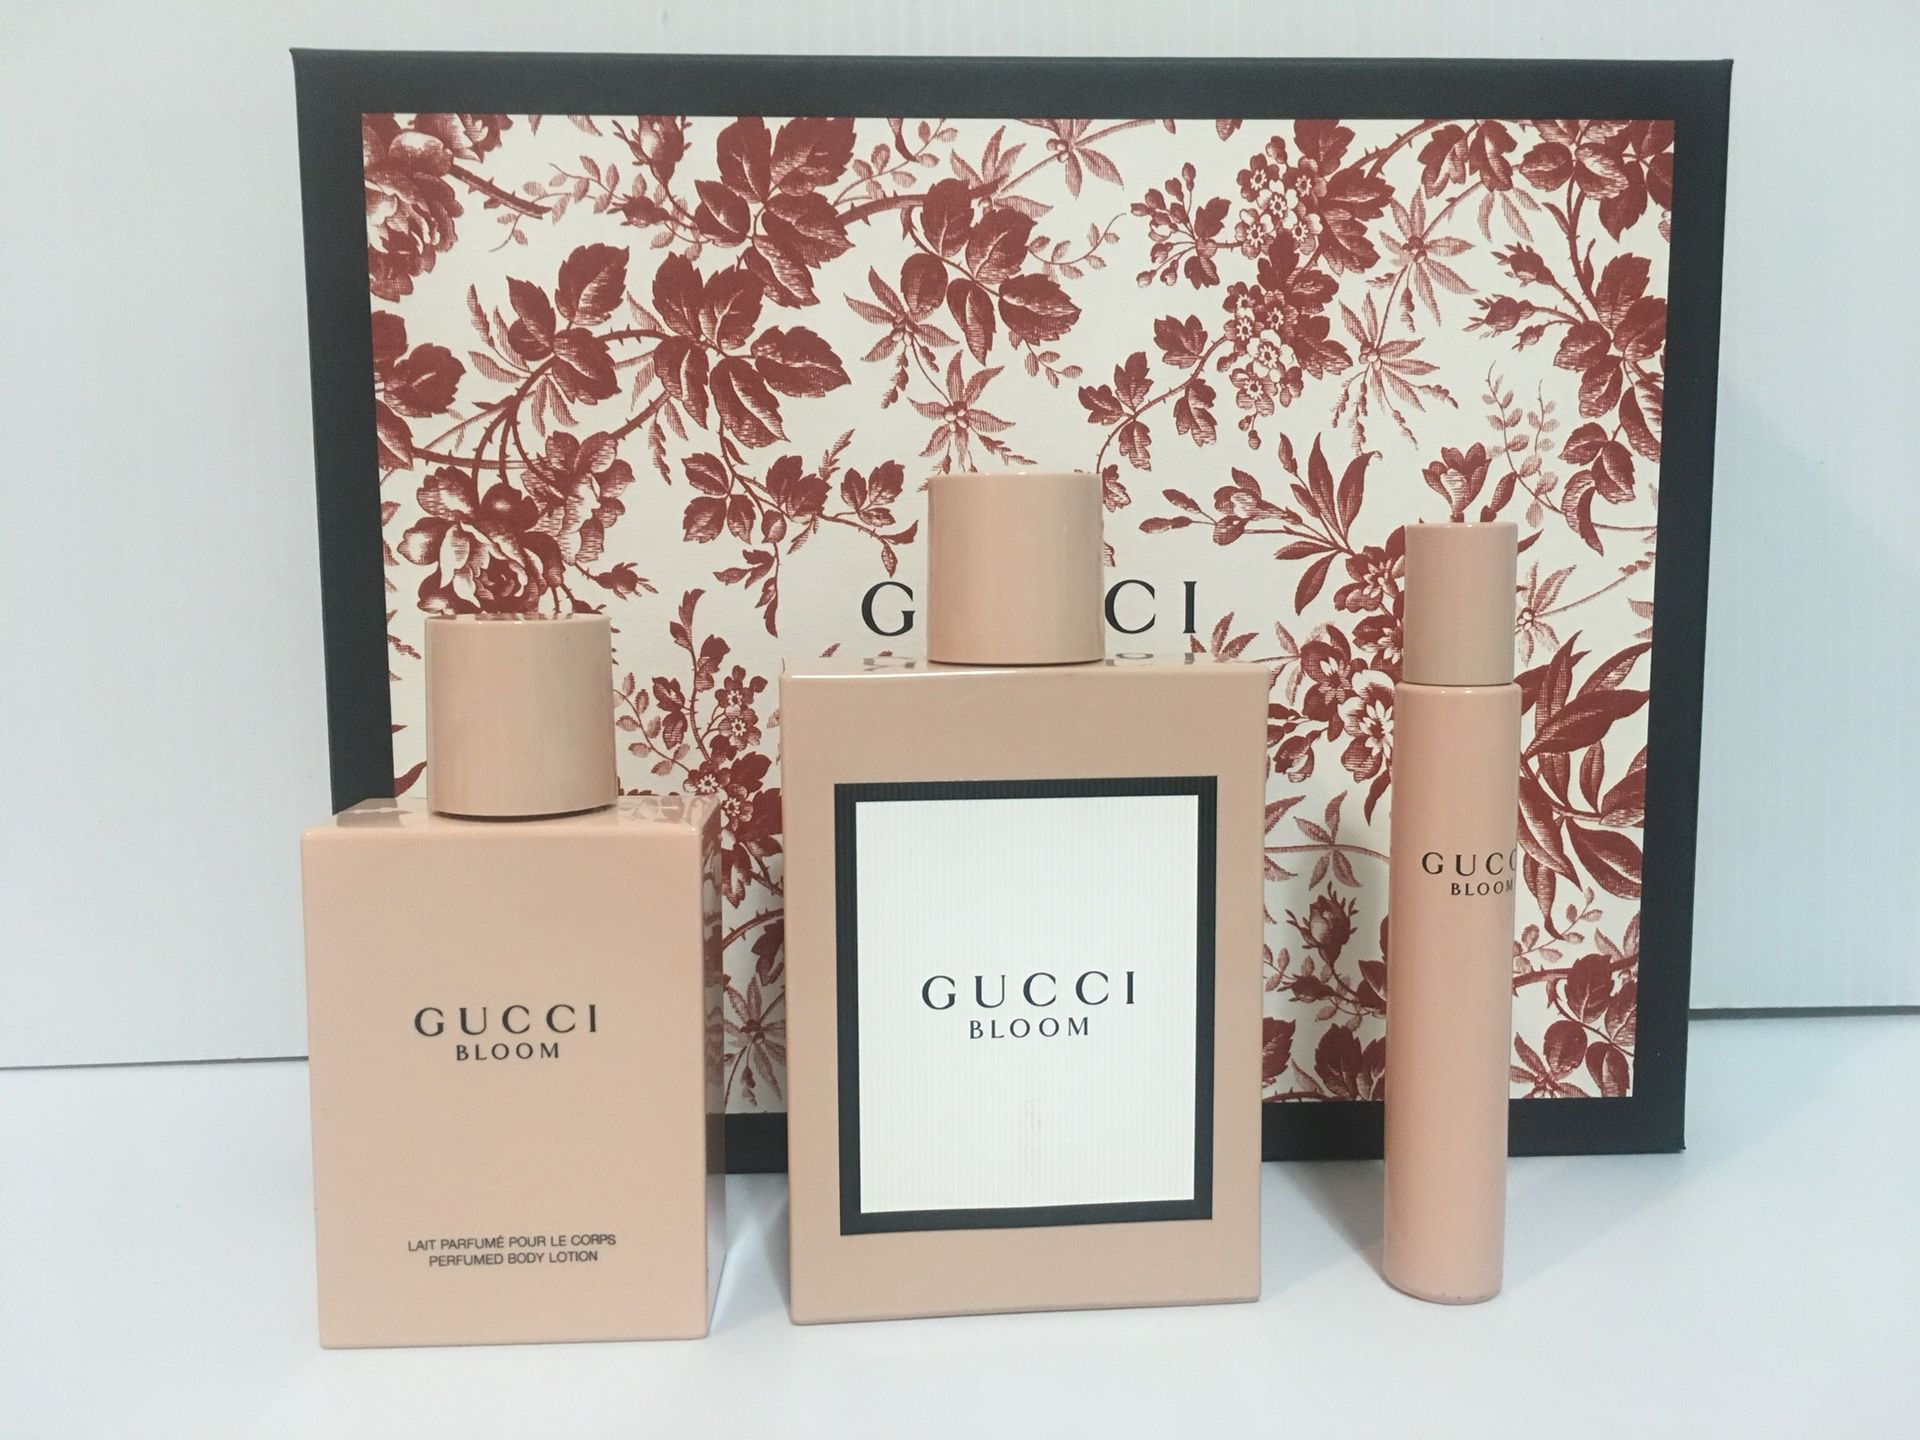 GUCCI BLOOM BY GUCCI PERFUME FOR WOMEN 3PC GIFT SET 3.4OZ+ LOTION